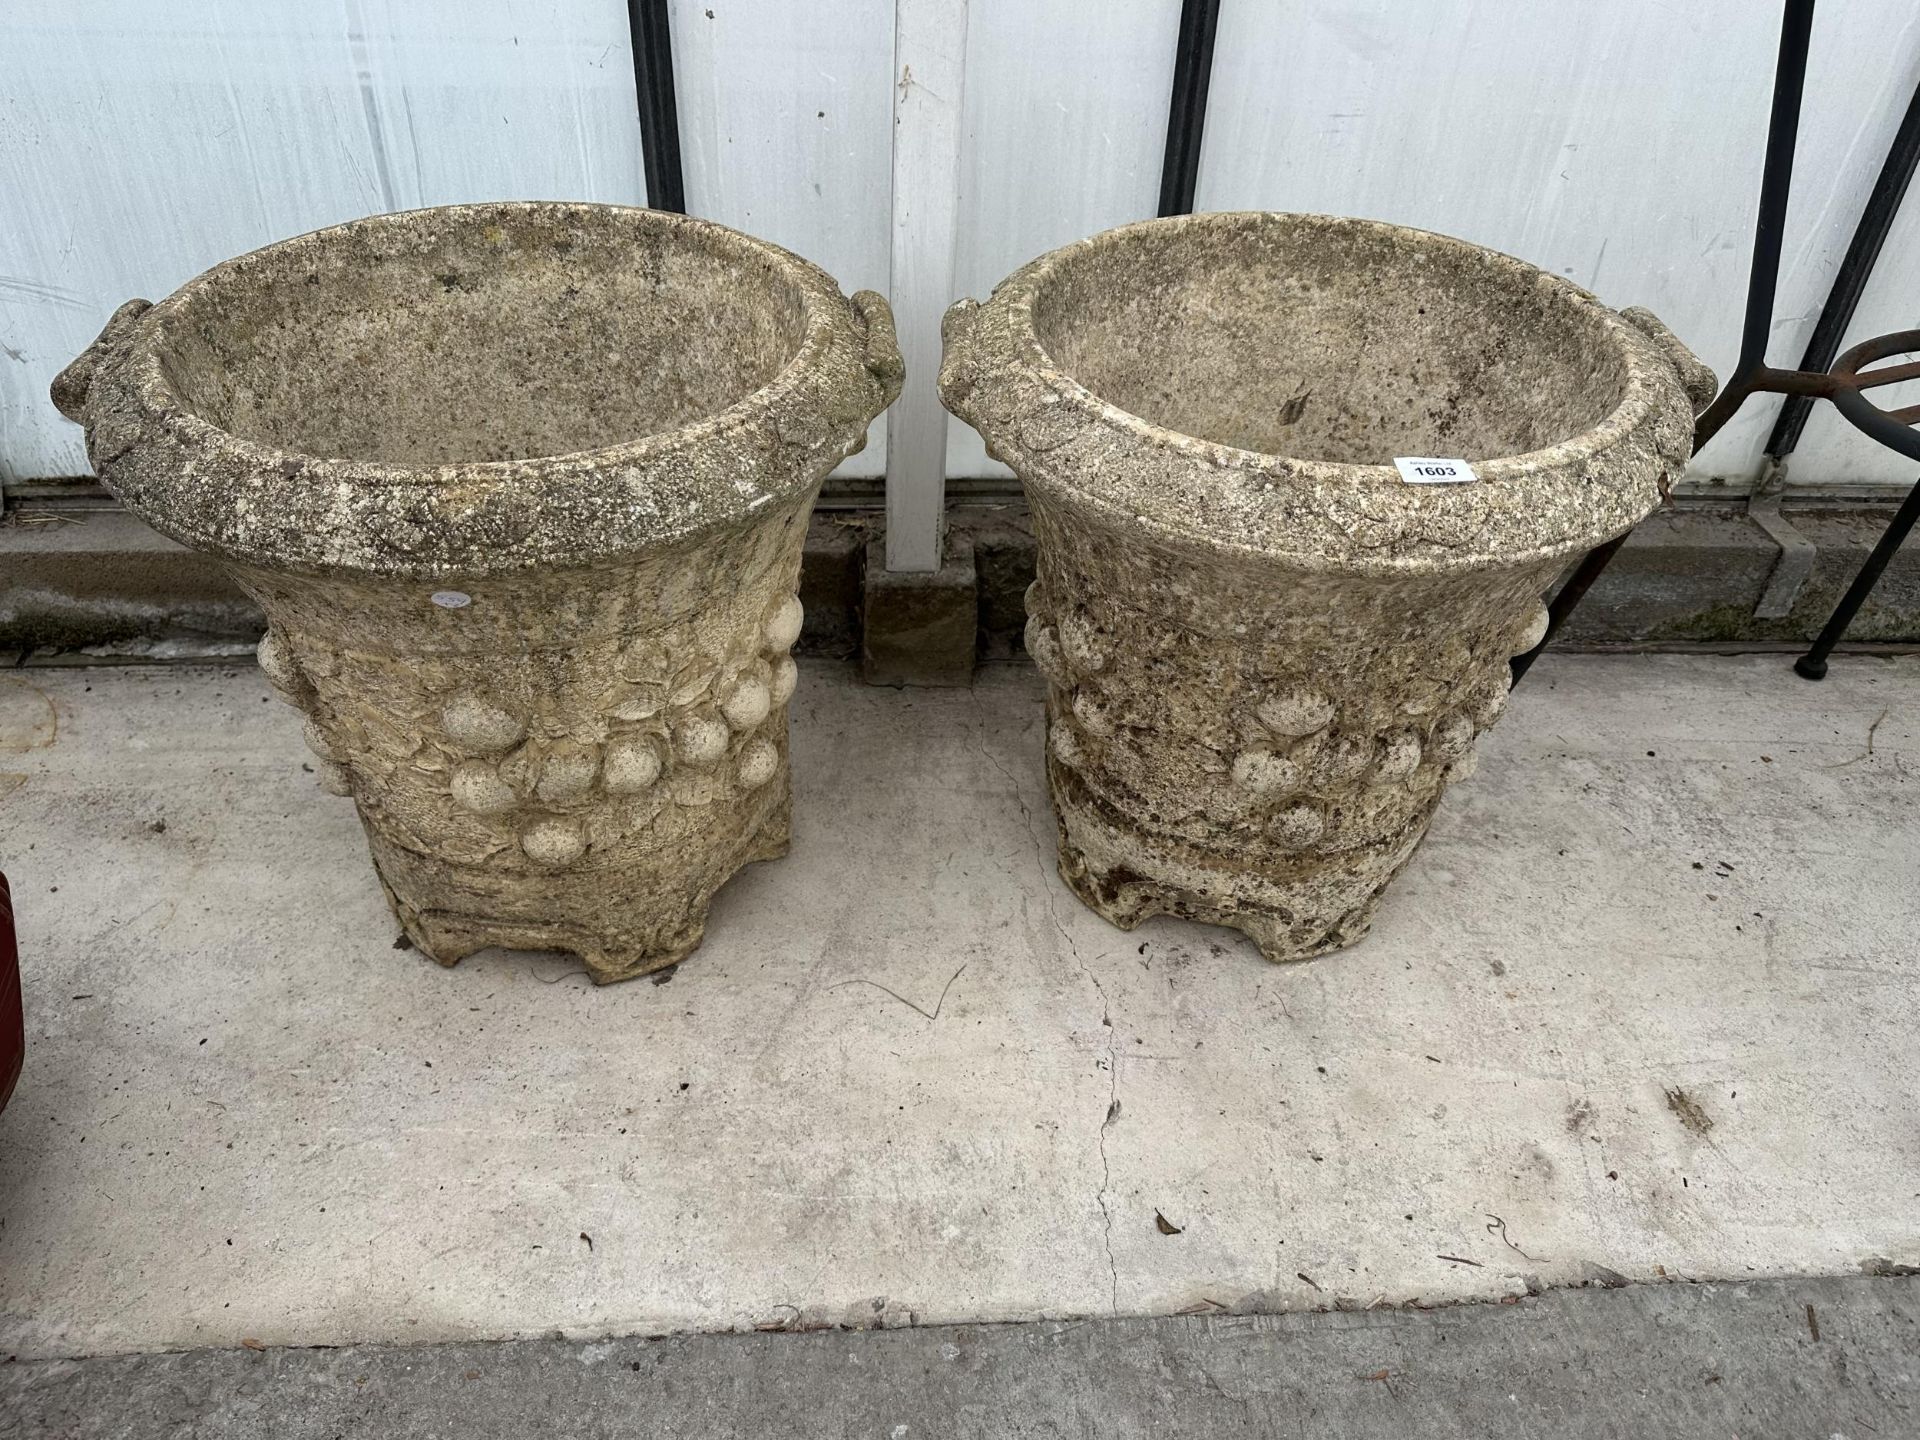 A PAIR OF LARGE DECORATIVE RECONSTITUTED STONE GARDEN PLANT POTS